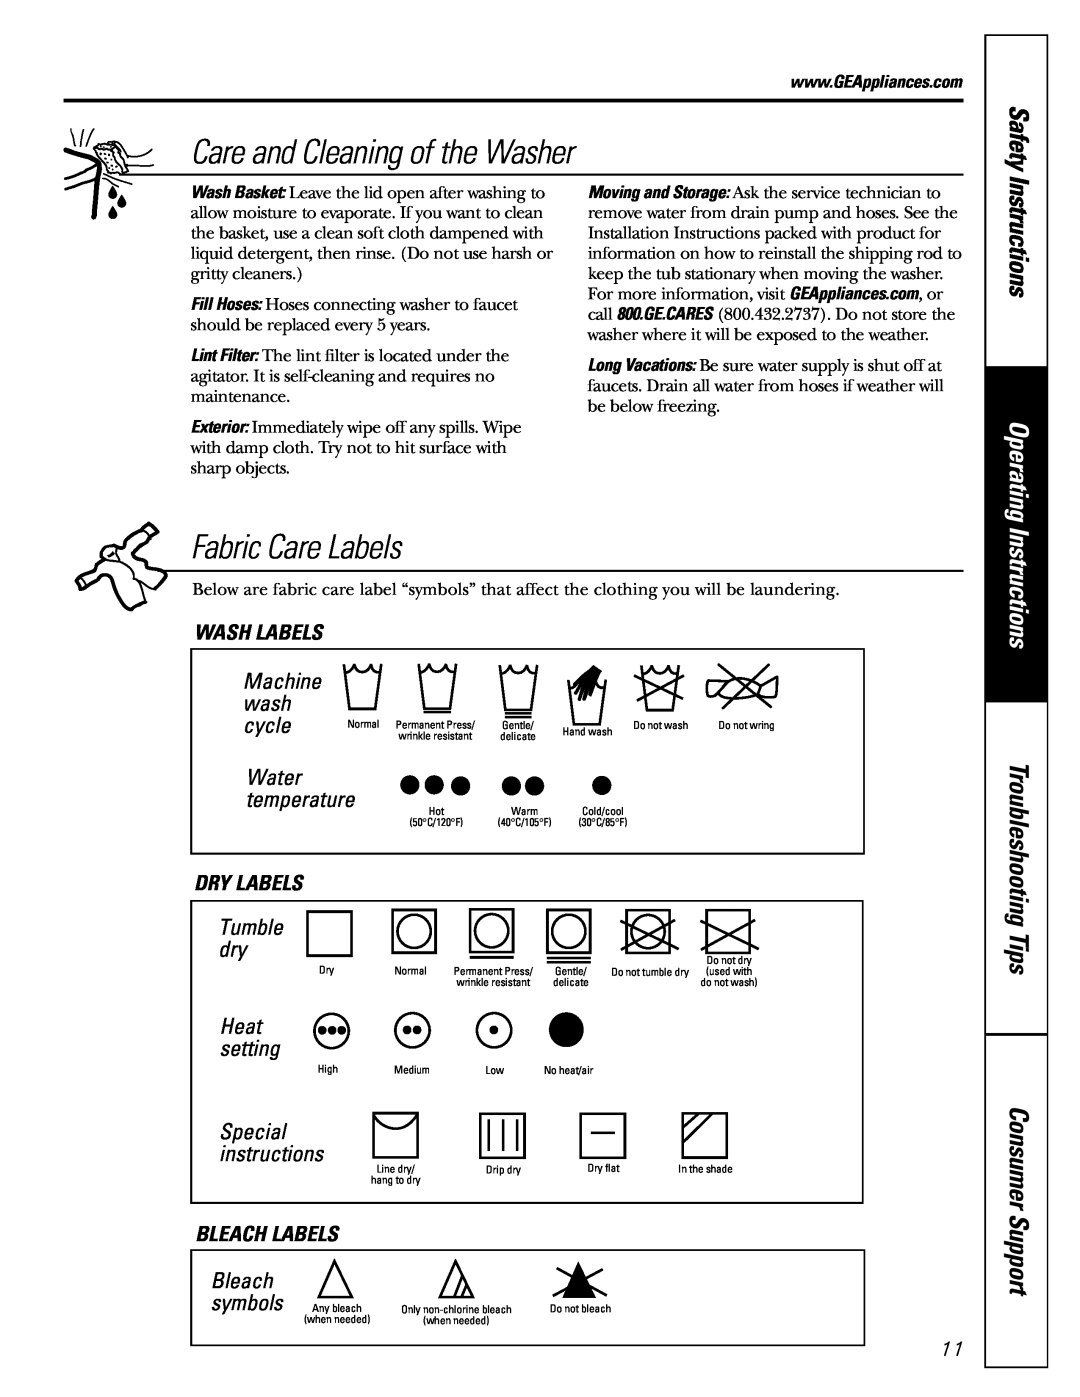 GE S4200 Care and Cleaning of the Washer, Fabric Care Labels, Safety, Instructions, Operating, Machine wash, cycle, Tumble 